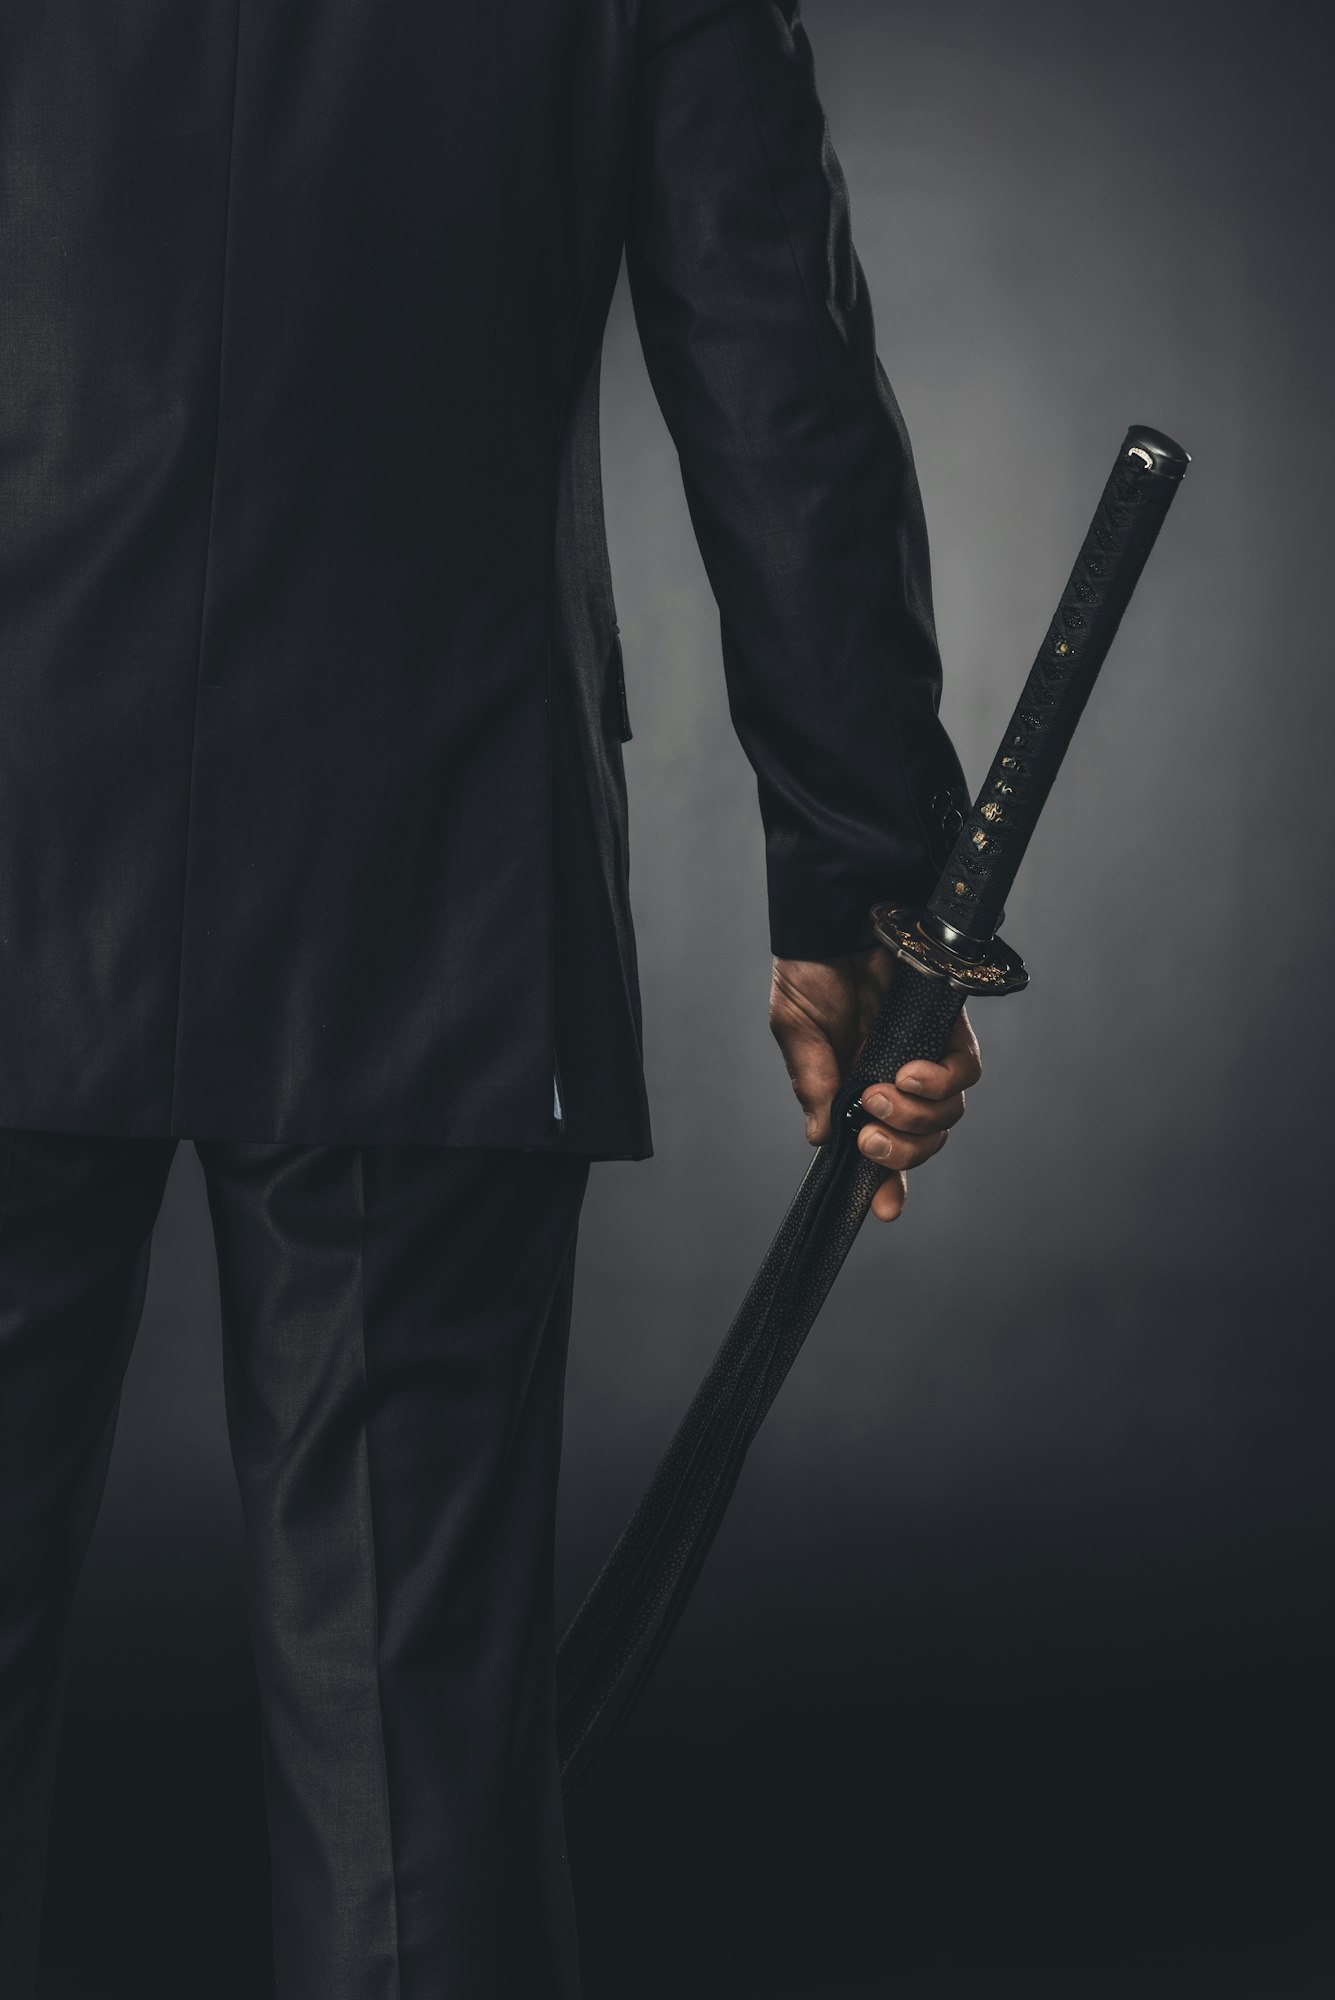 cropped shot of man in business suit with katana sword on black